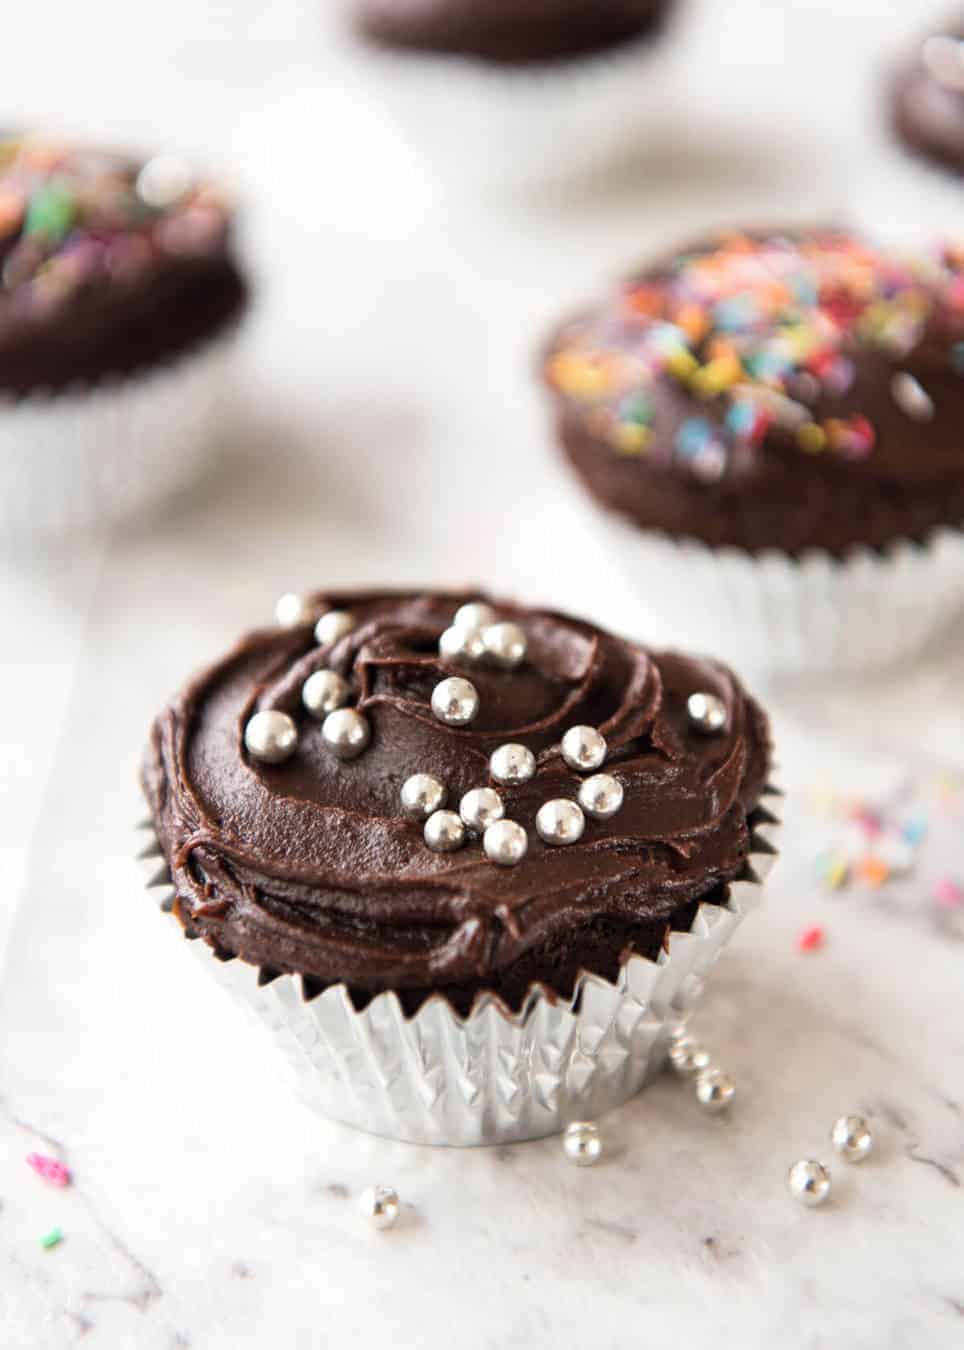 No stand mixer required to make the Best EASY Chocolate Cupcakes. Moist, deeply chocolatey with a tender crumb, these are unbelievably fast & easy. www.recipetineats.com